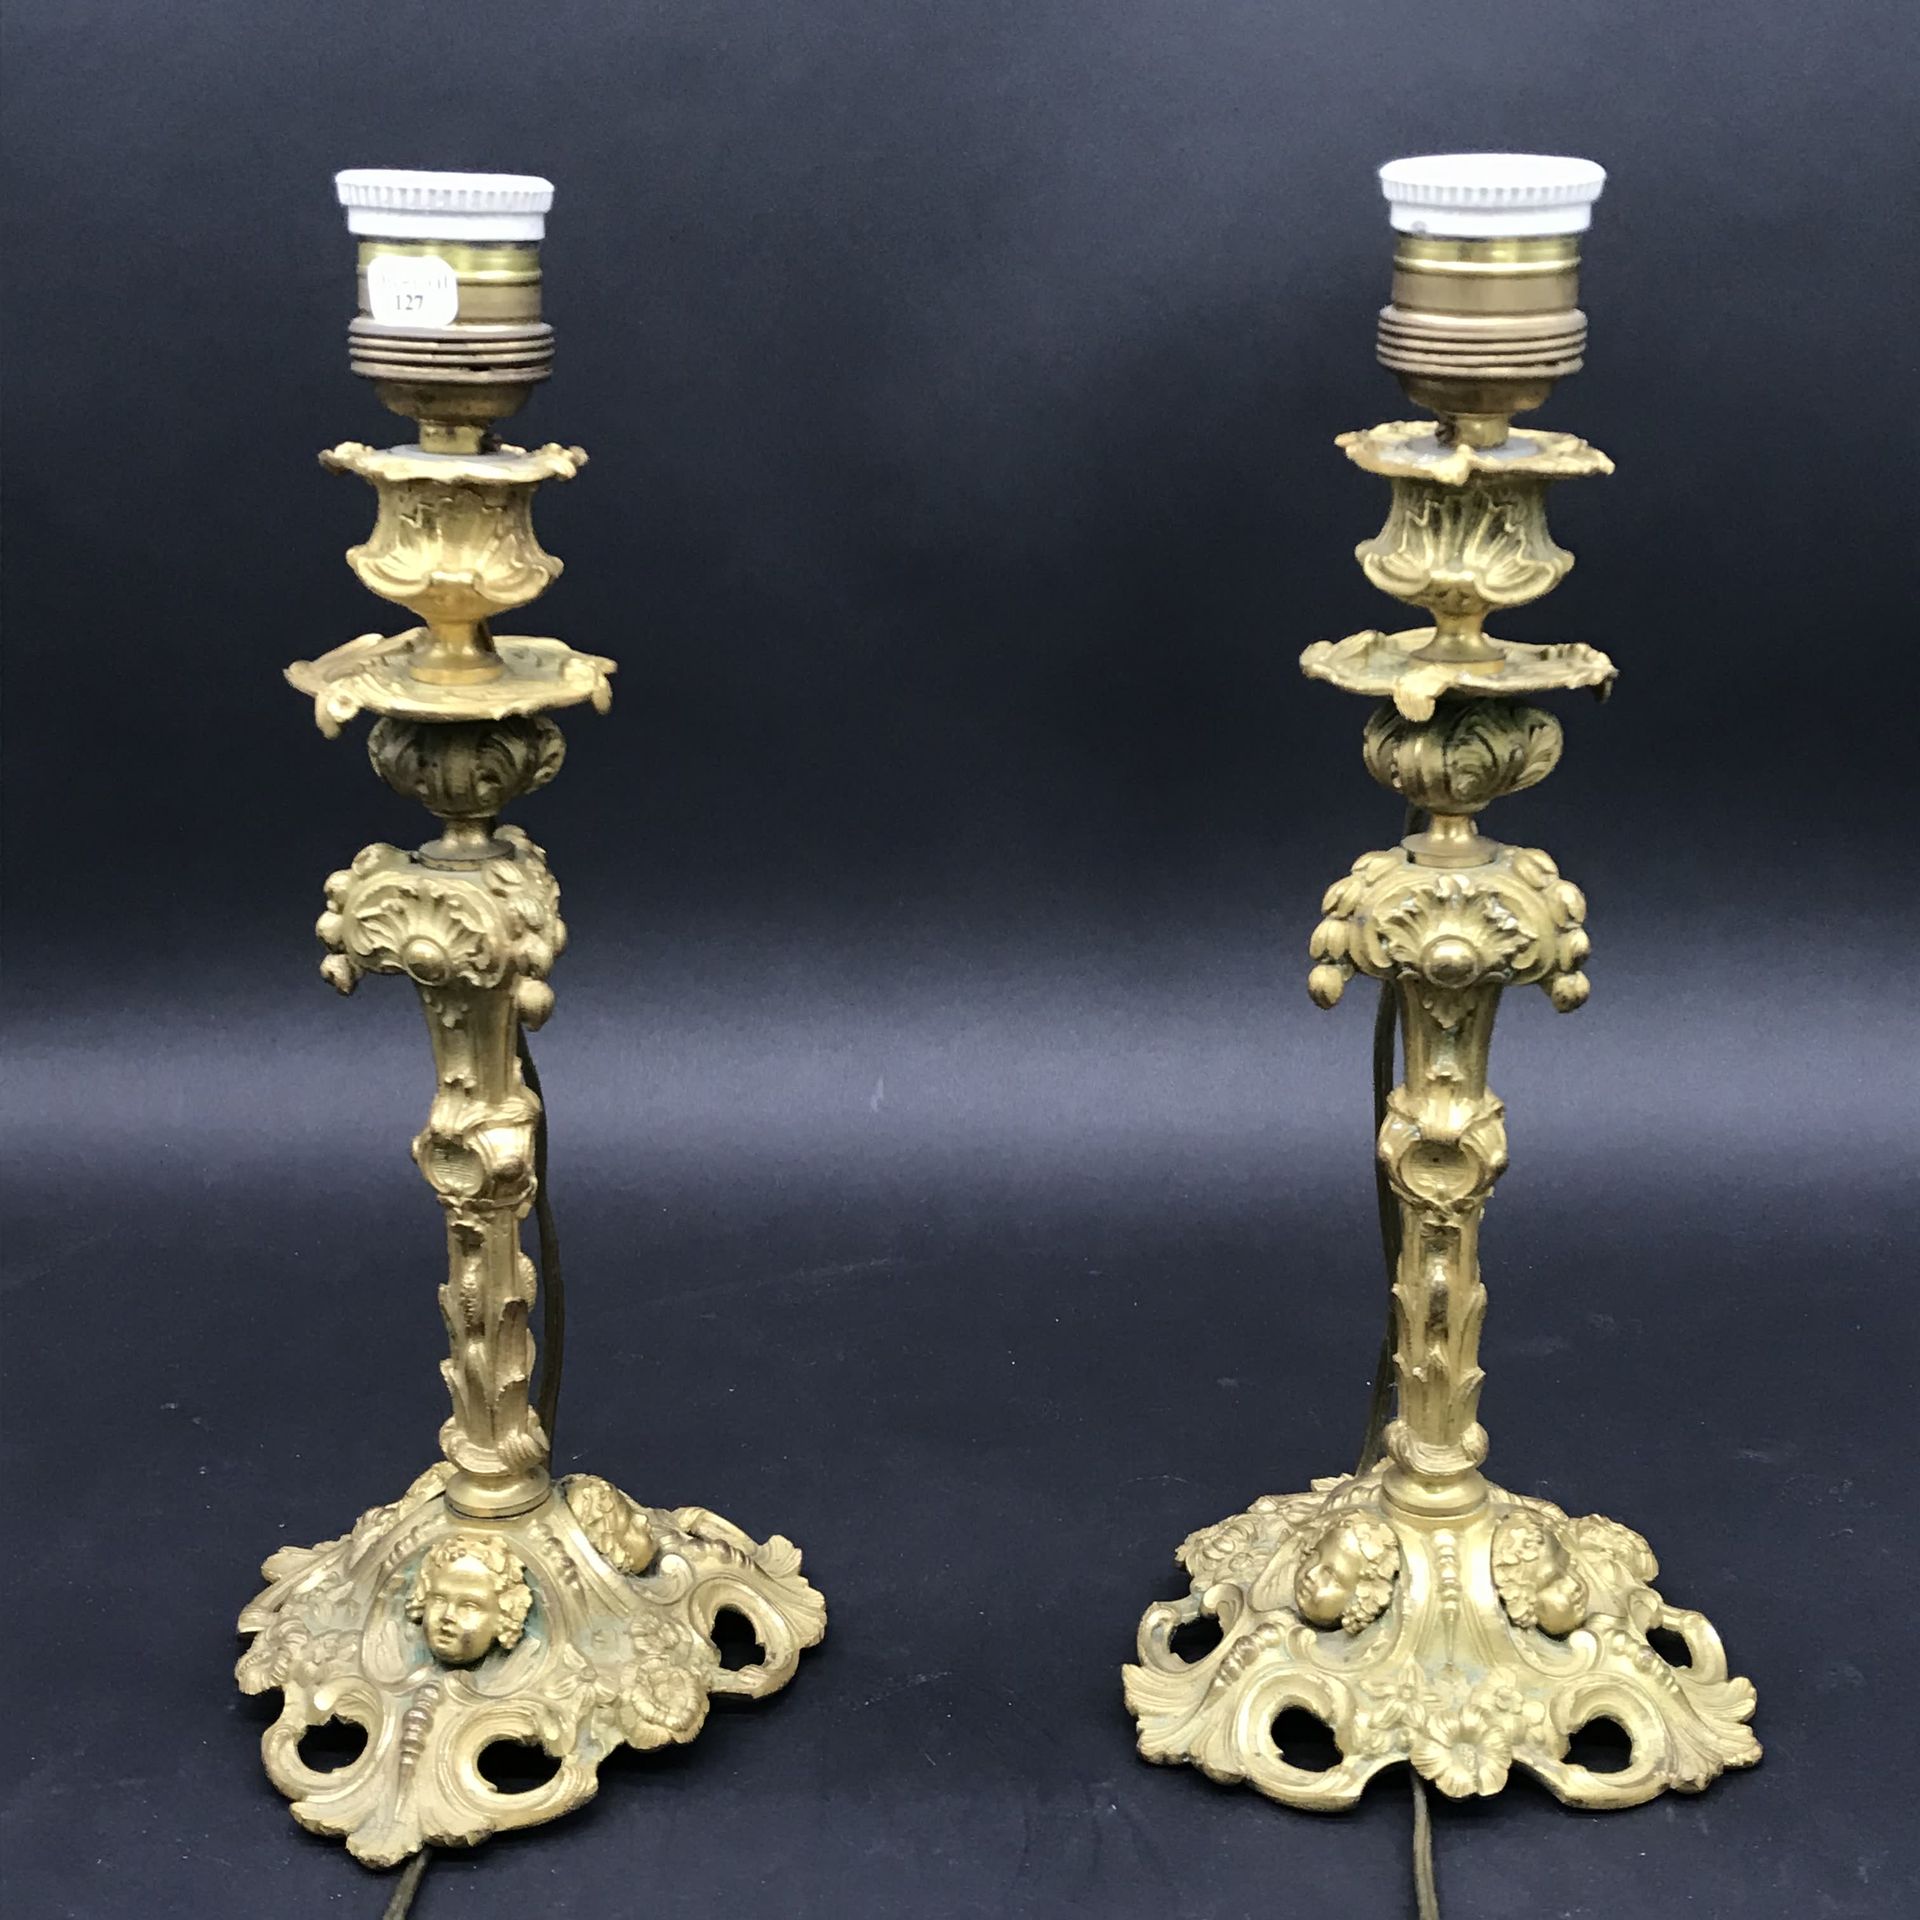 Null Pair of CANDLES

in gilded and chased bronze with foliage decoration and de&hellip;